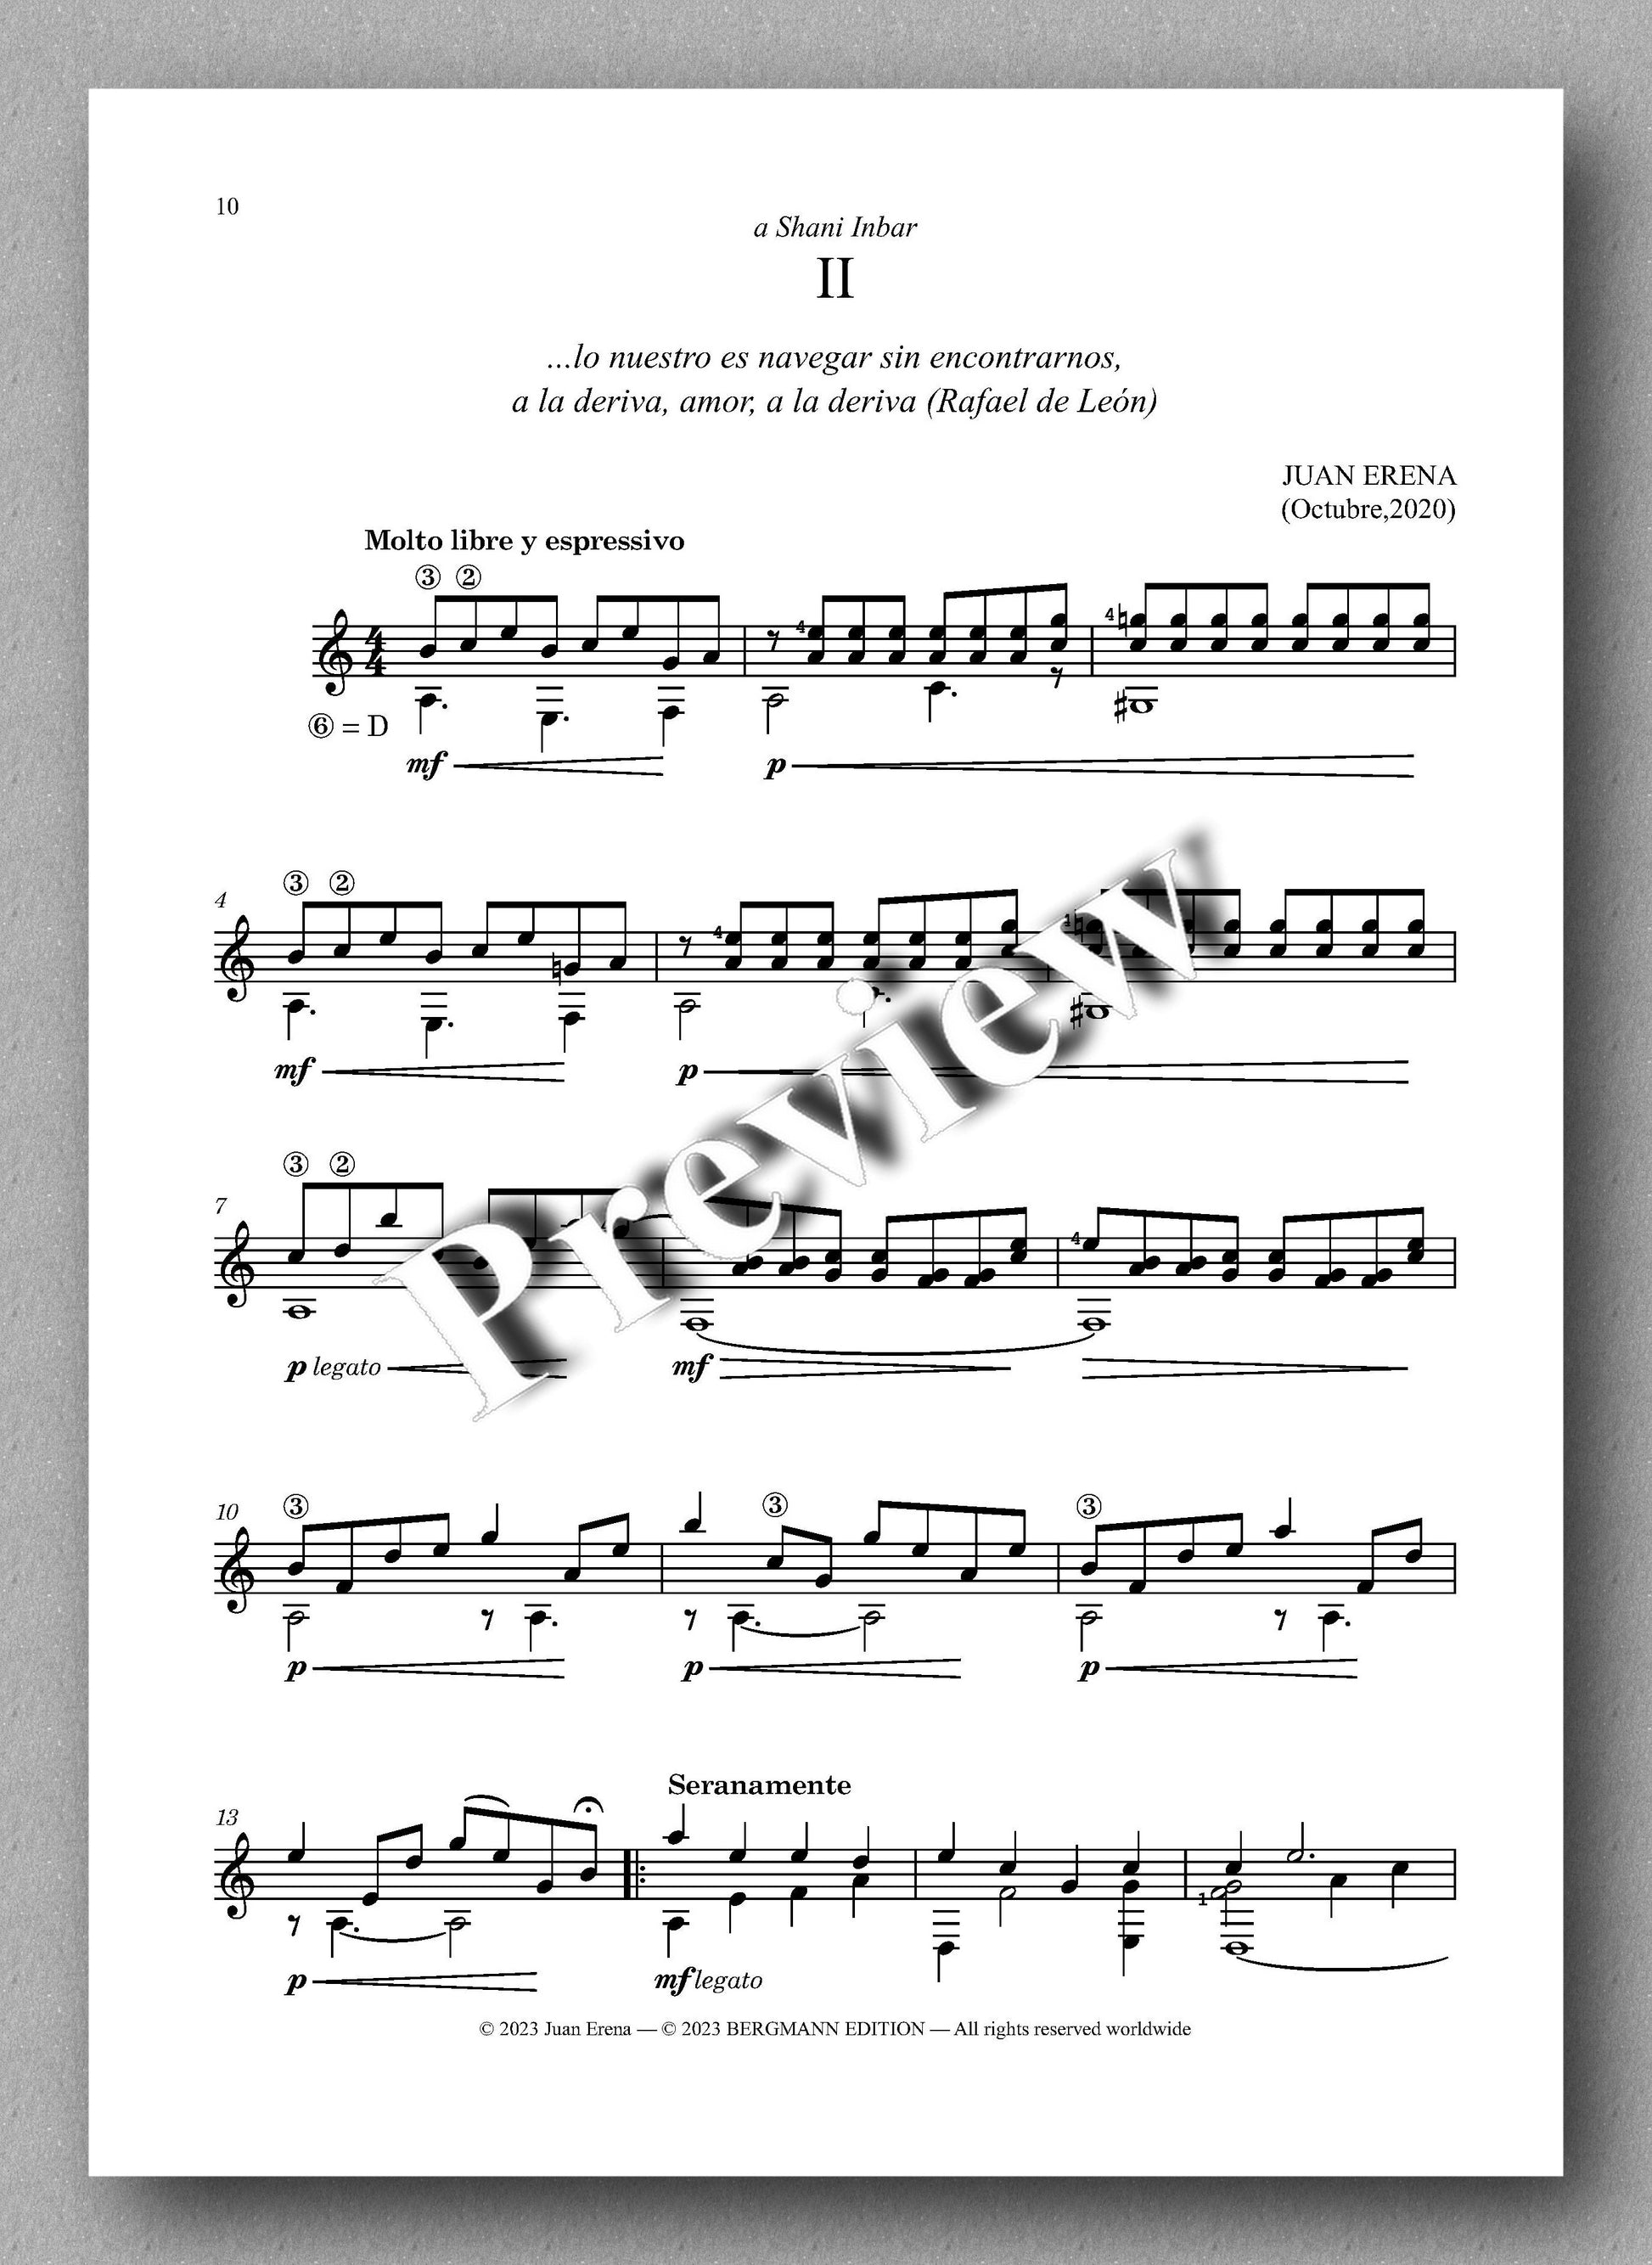 Juan Erena, Sonata V, "Poemas y Olvidos" (Poems and Oblivions) - preview of the music score 2